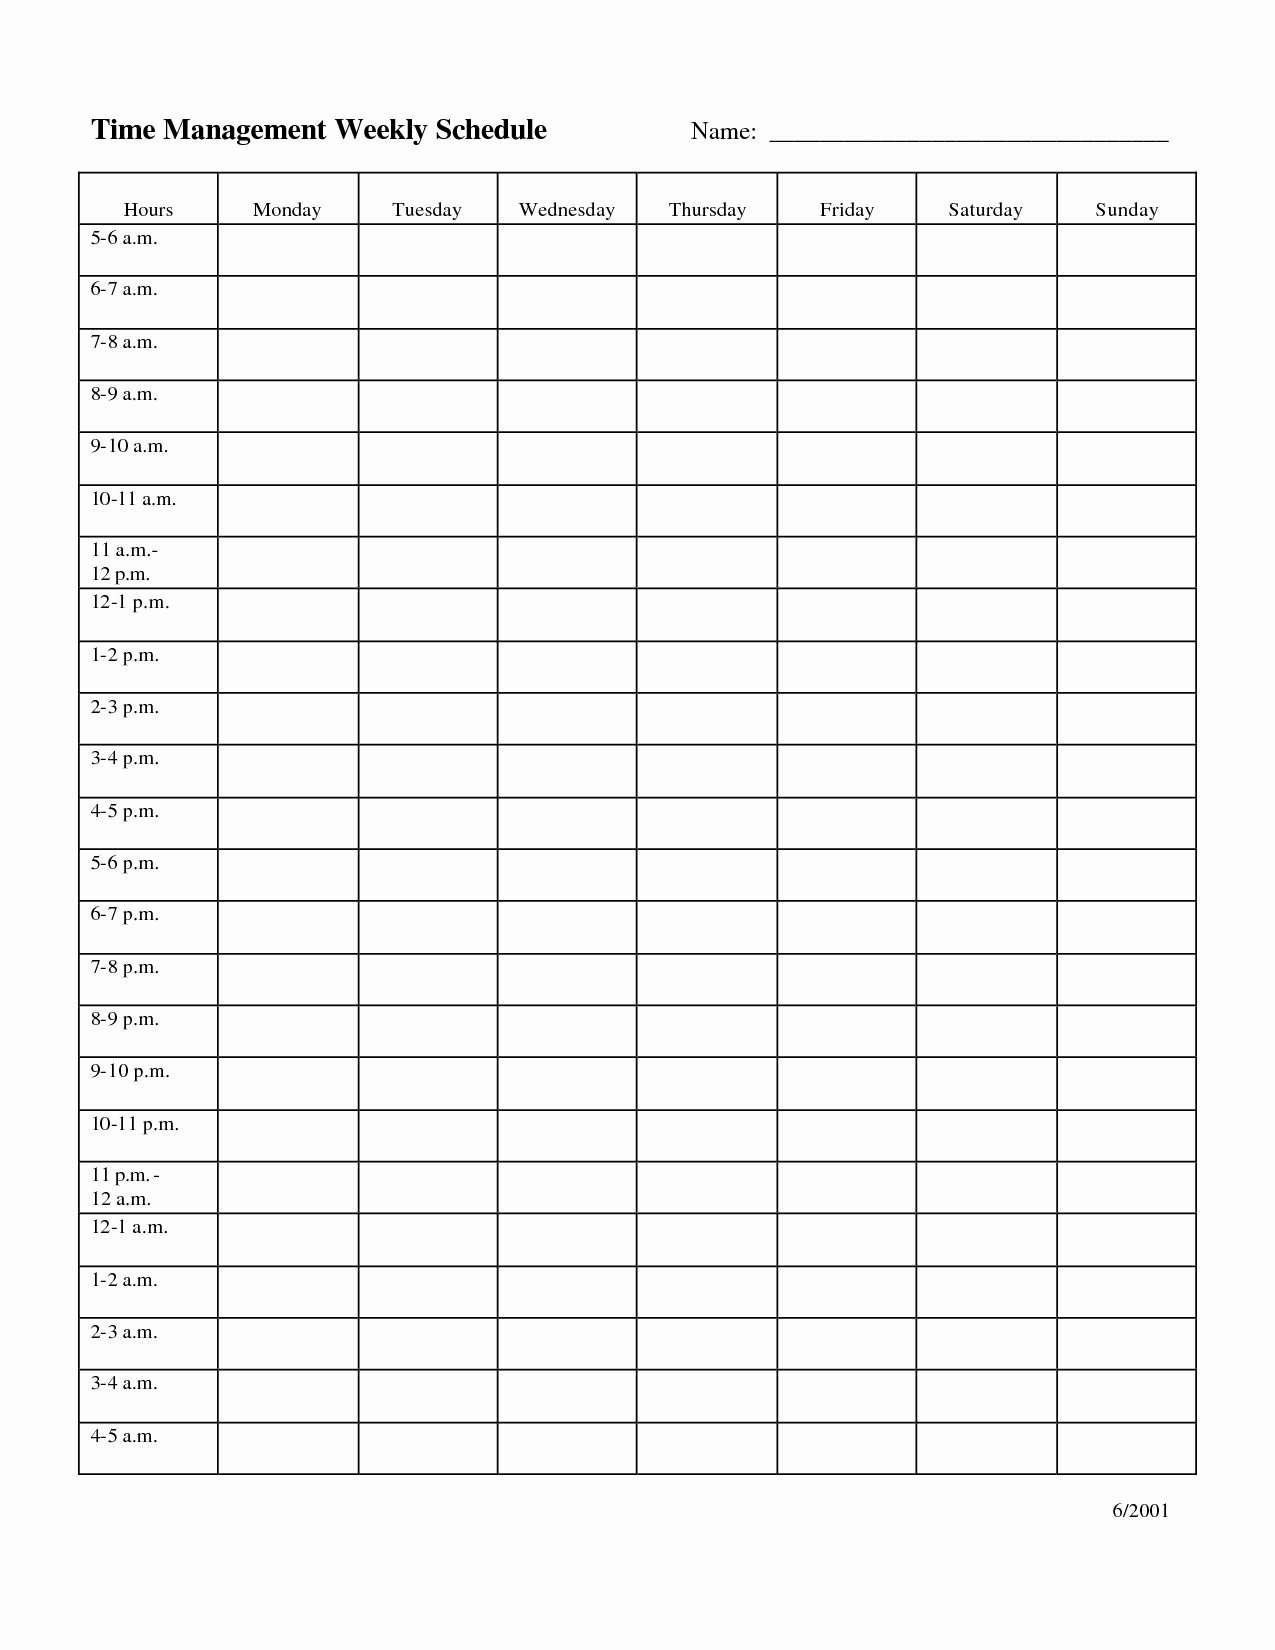 Weekly Schedule Template Printable Luxury Time Management Schedule Template